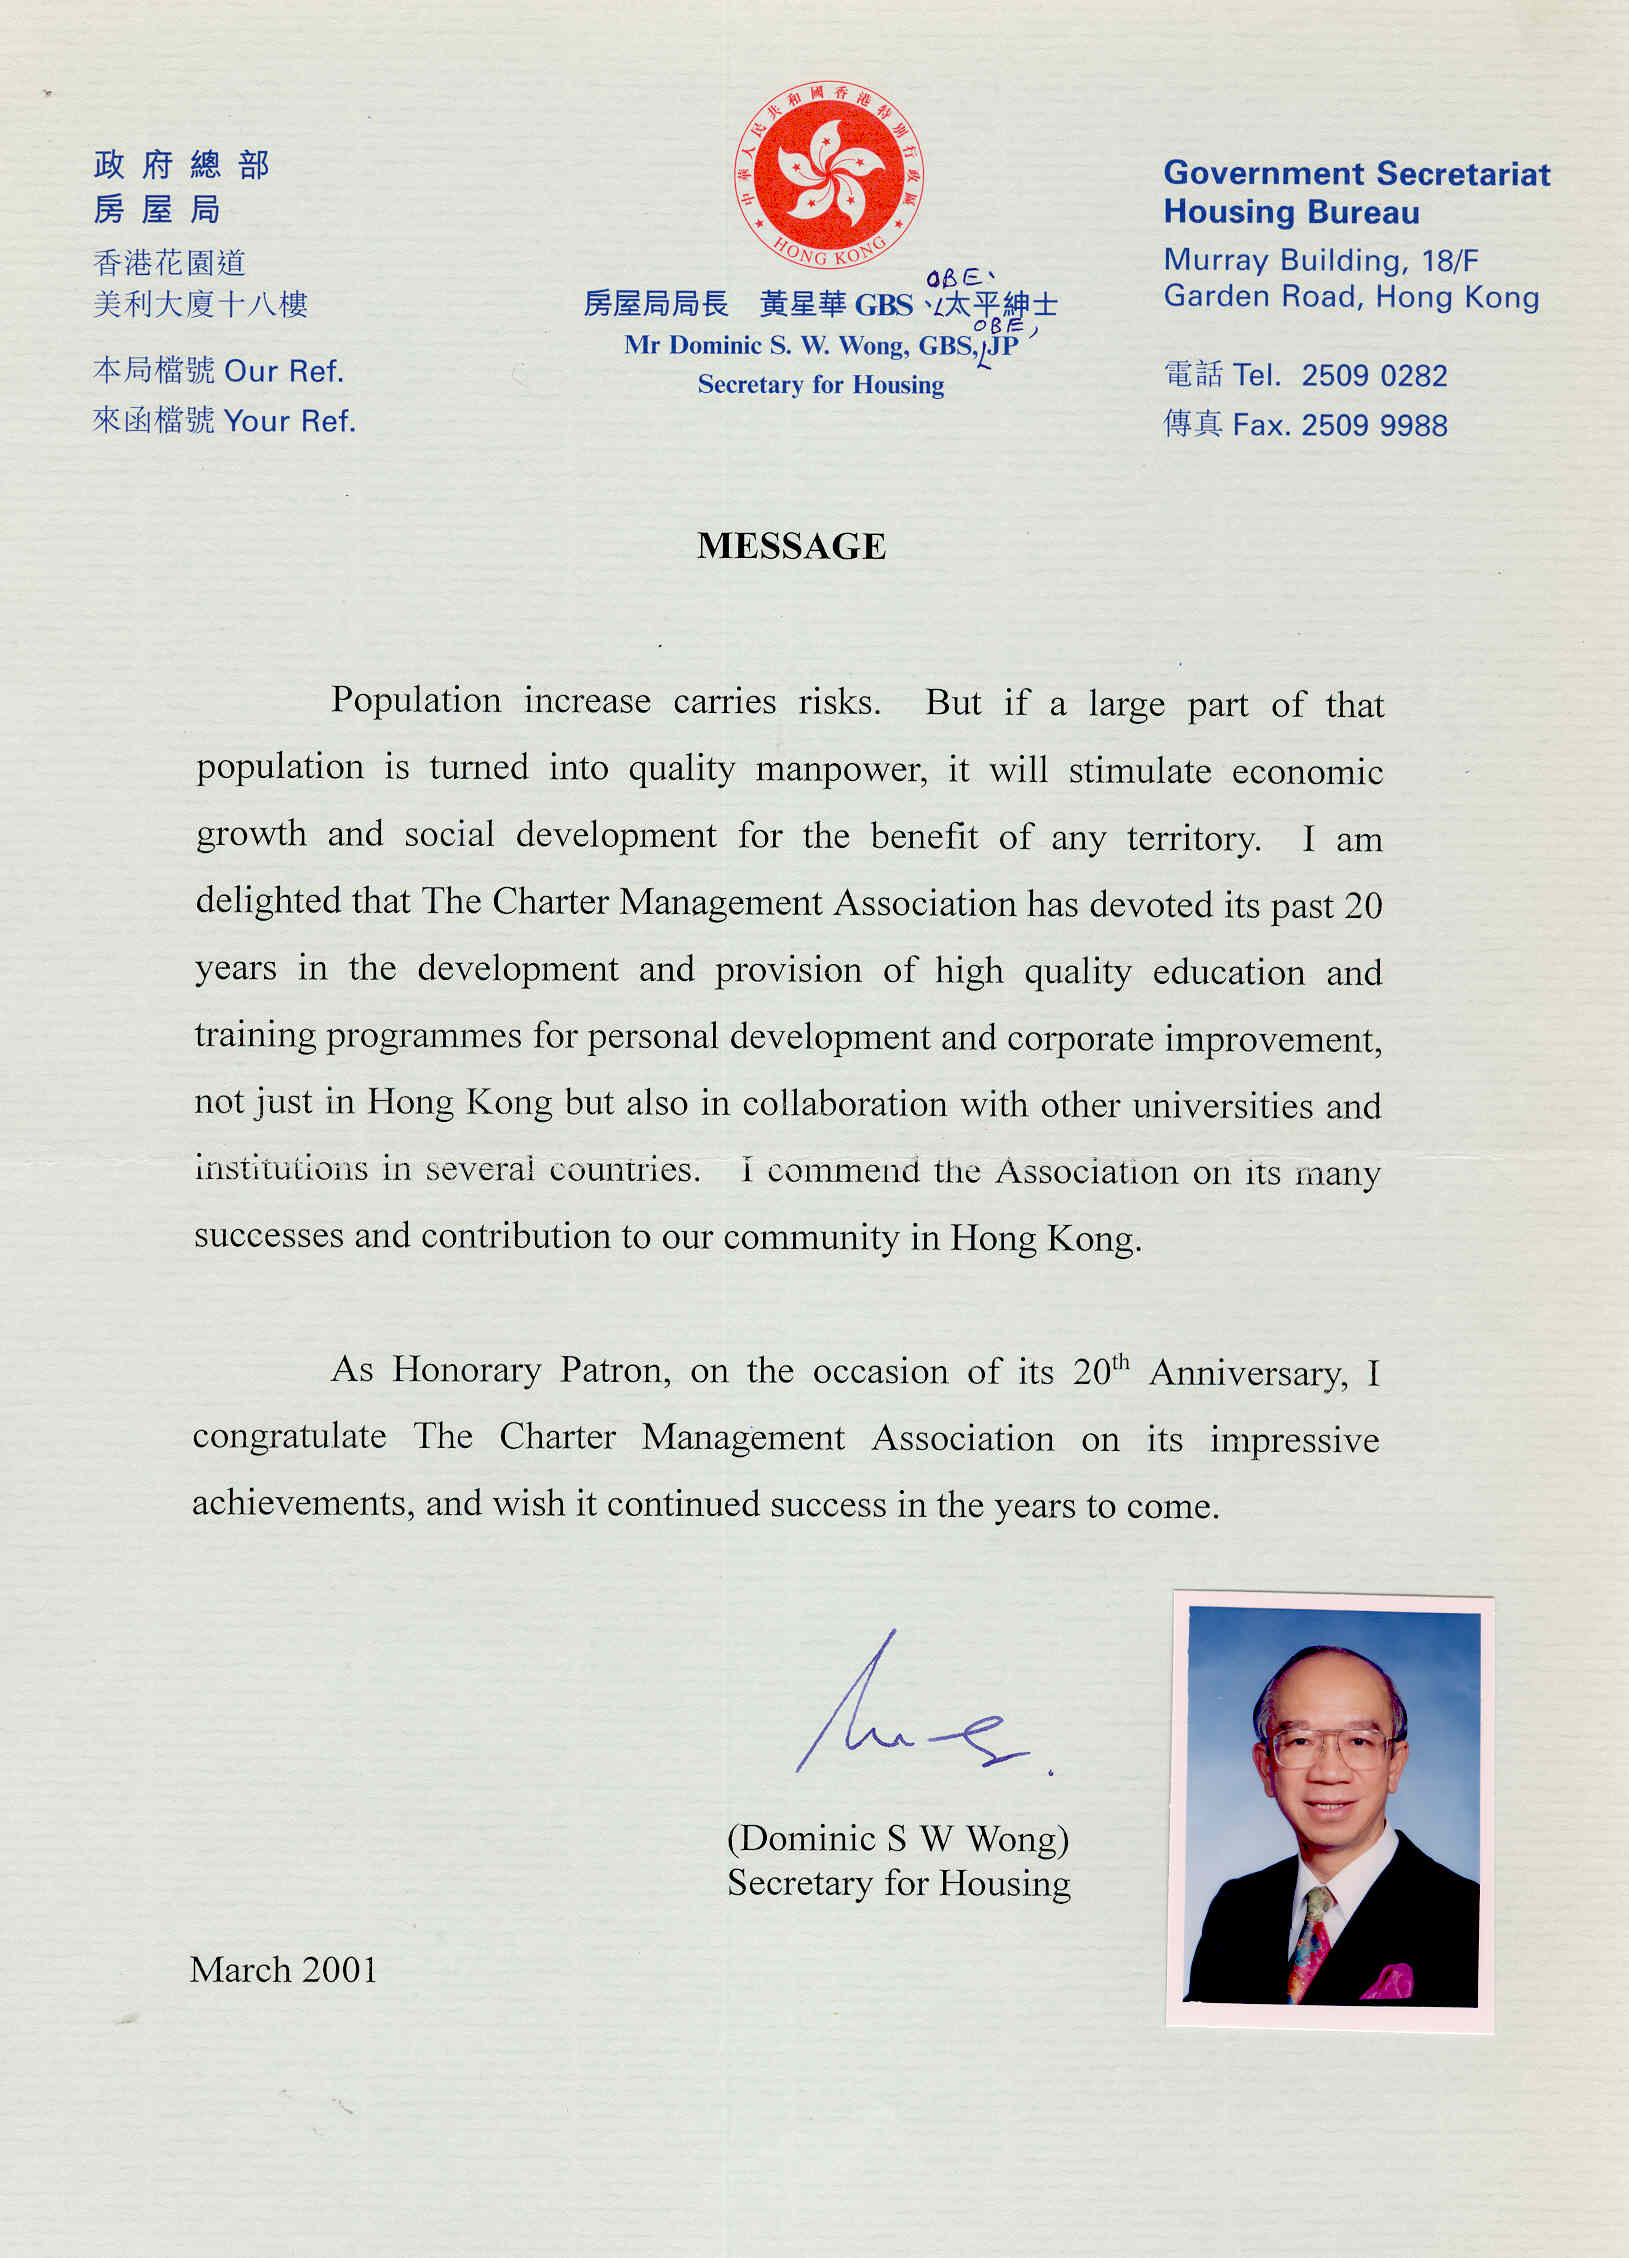 cmas-30th-anniversary-message-by-prof-dr-dominic-s-w-wong-gbs-obe-jp-letter